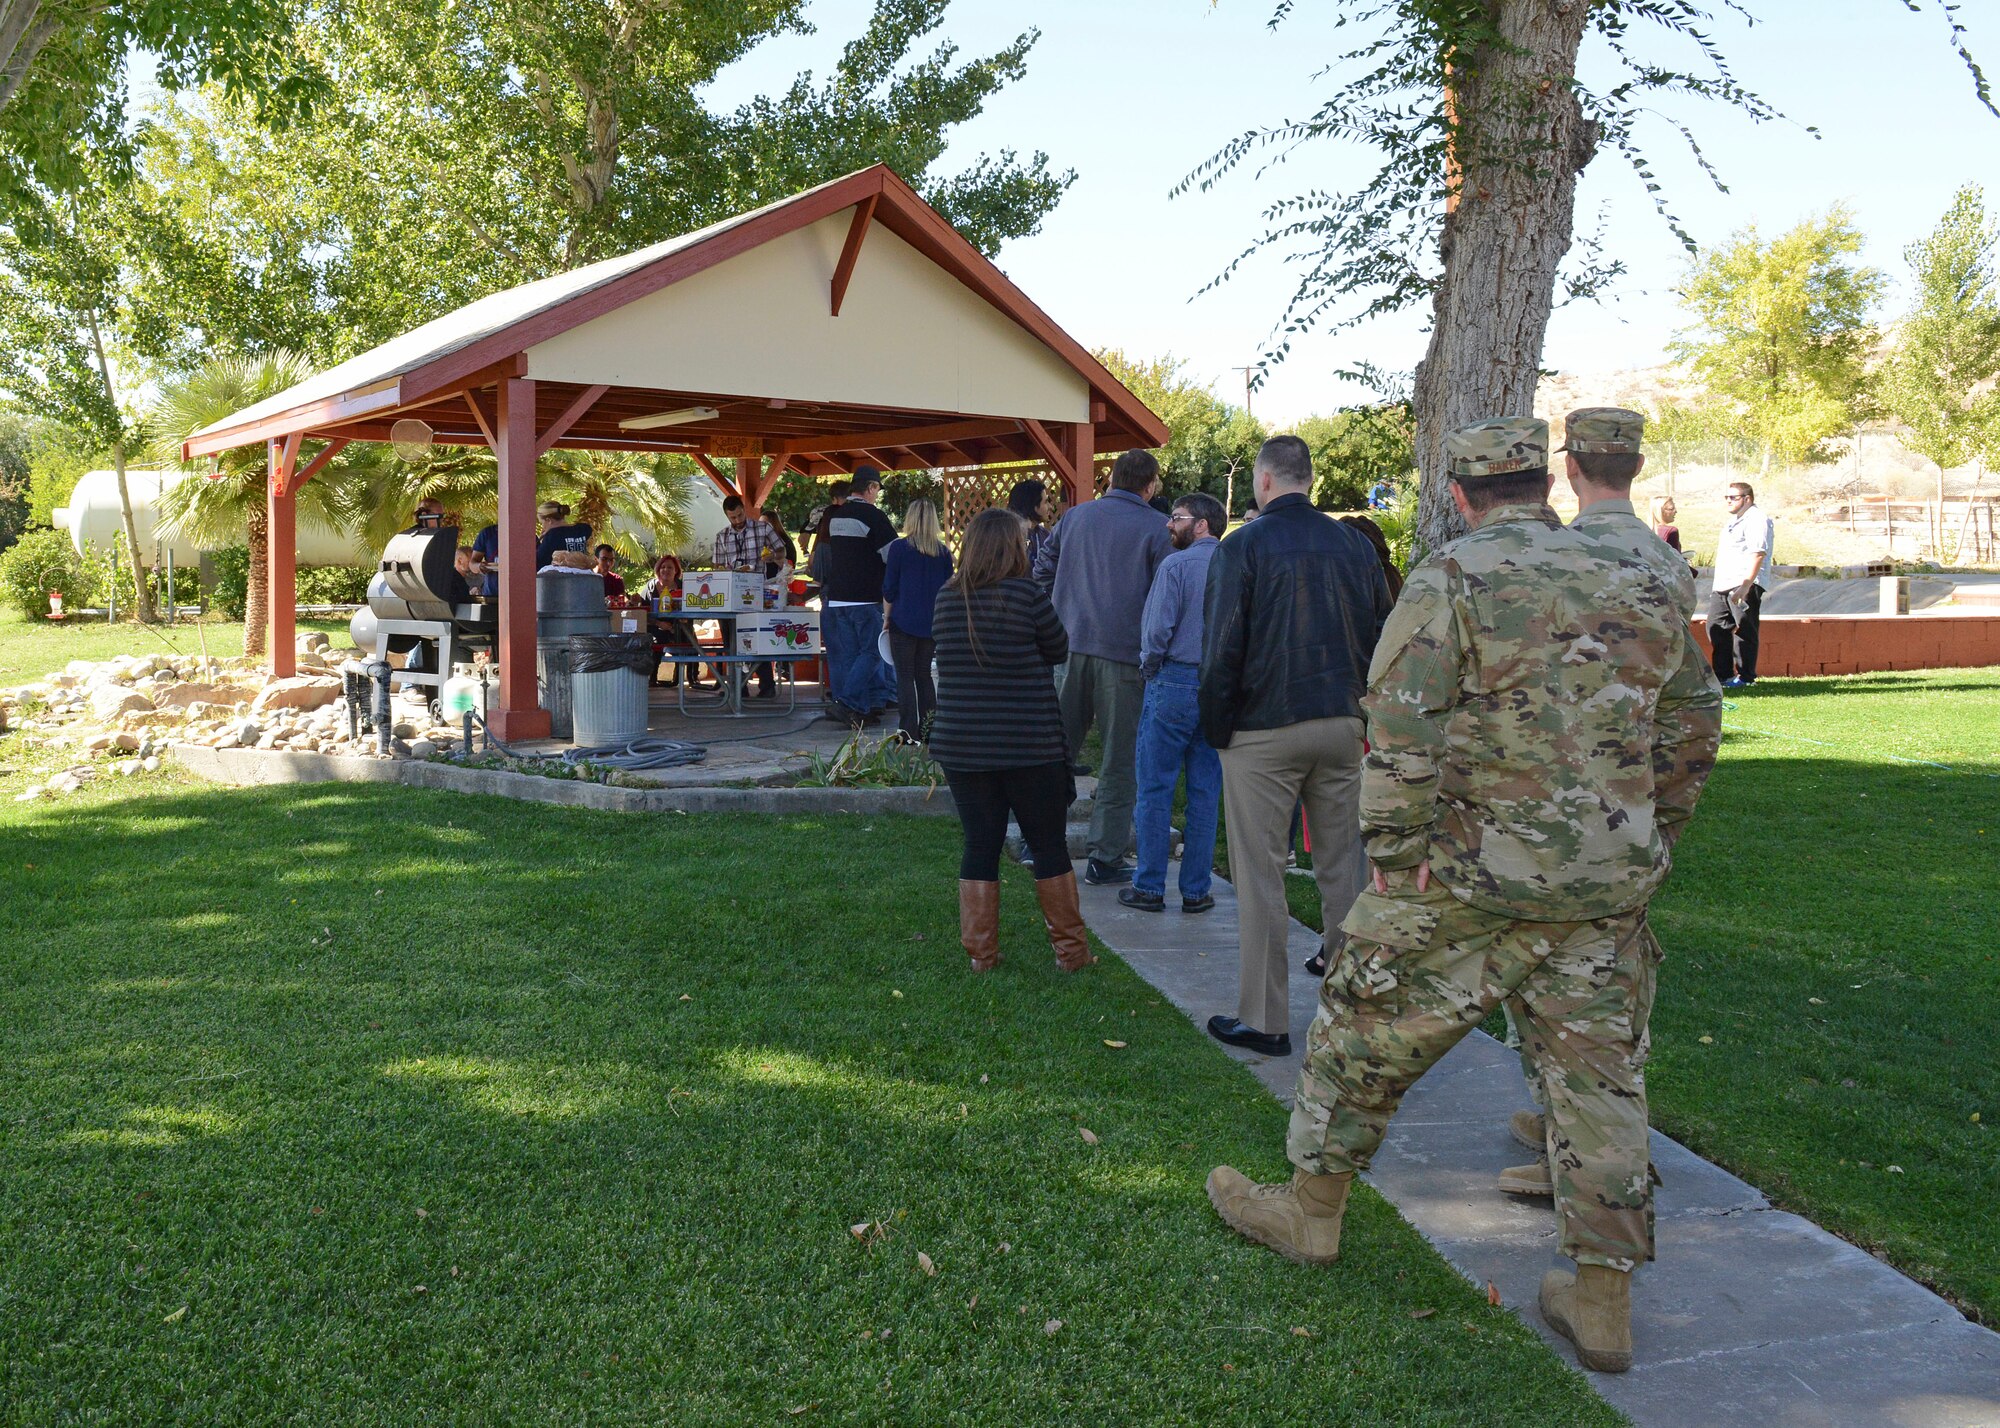 Team Edwards members from Air Force Research Laboratory Detachment 7 line up to get a complimentary hot dog and hamburger during an open house at Fire Station #4 Oct. 11. (U.S. Air Force photo by Kenji Thuloweit)